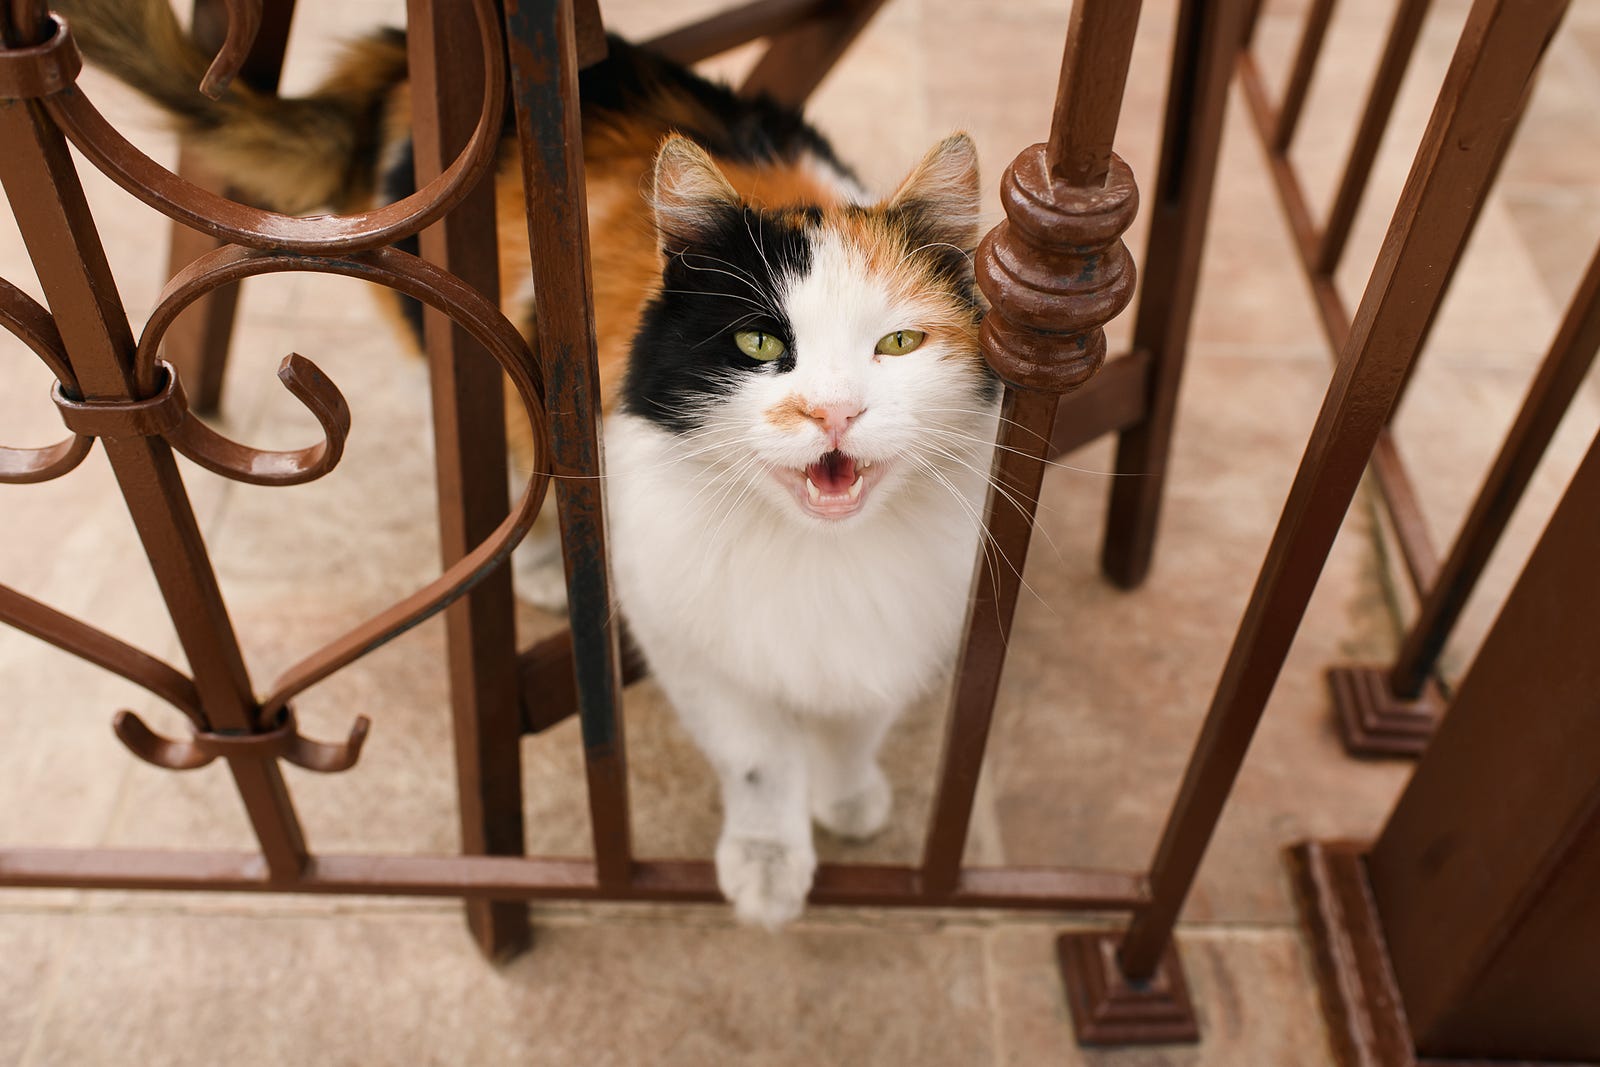 A calico kitty steps gingerly onto a small fence, poking it’s head through and meowing for attention.